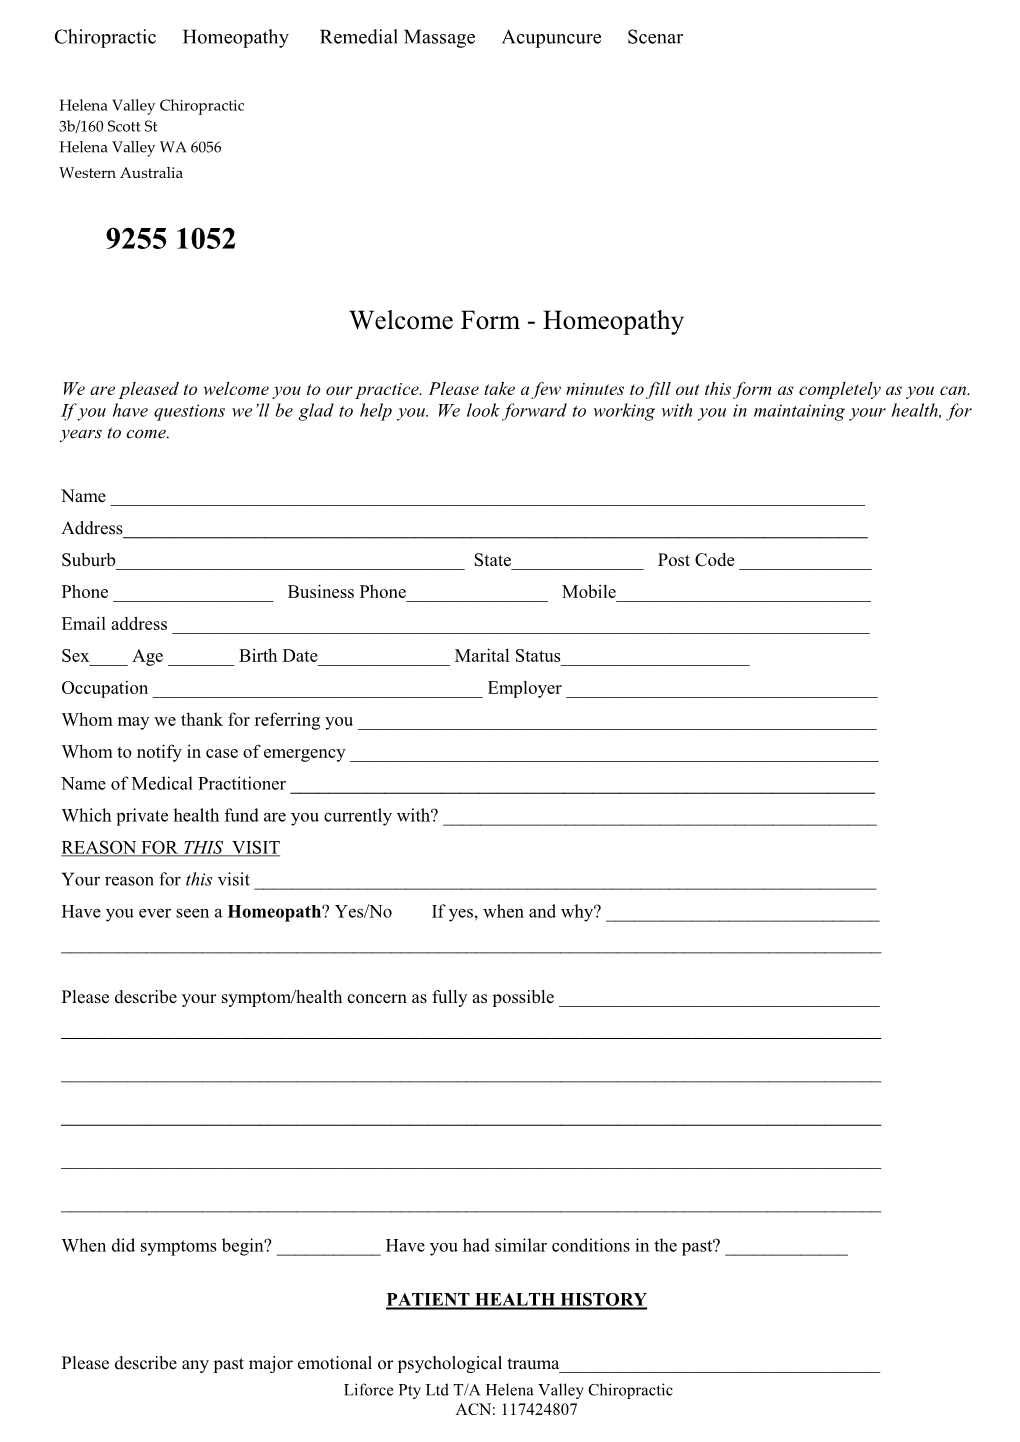 Welcome Form - Homeopathy